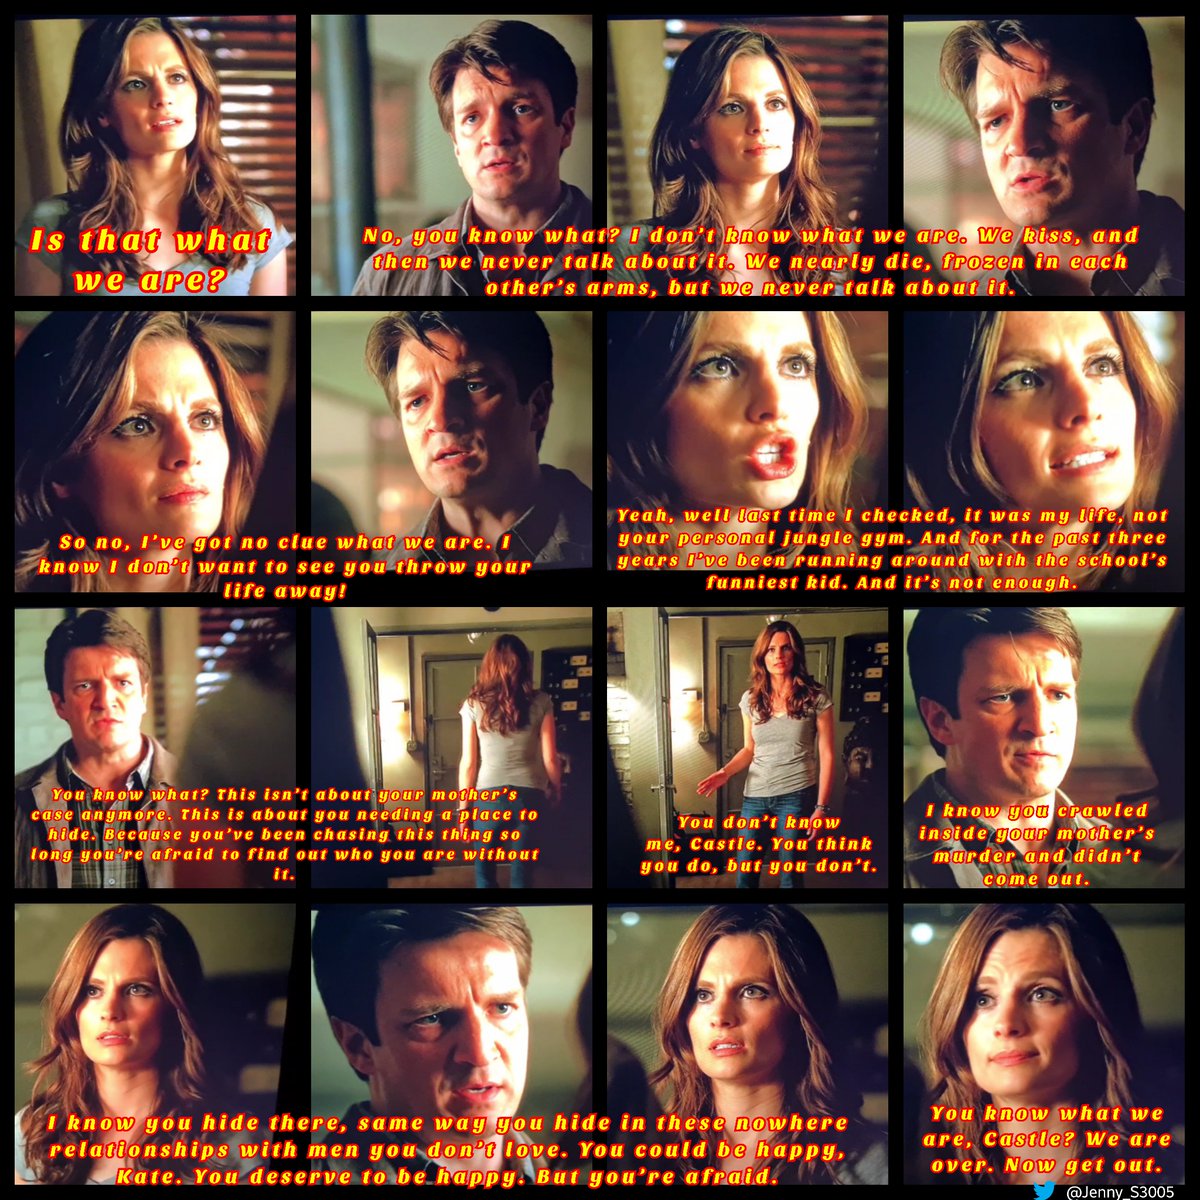 05/16/11- #Castle 3x24- KNOCKOUT aired 10 years ago 

KB: